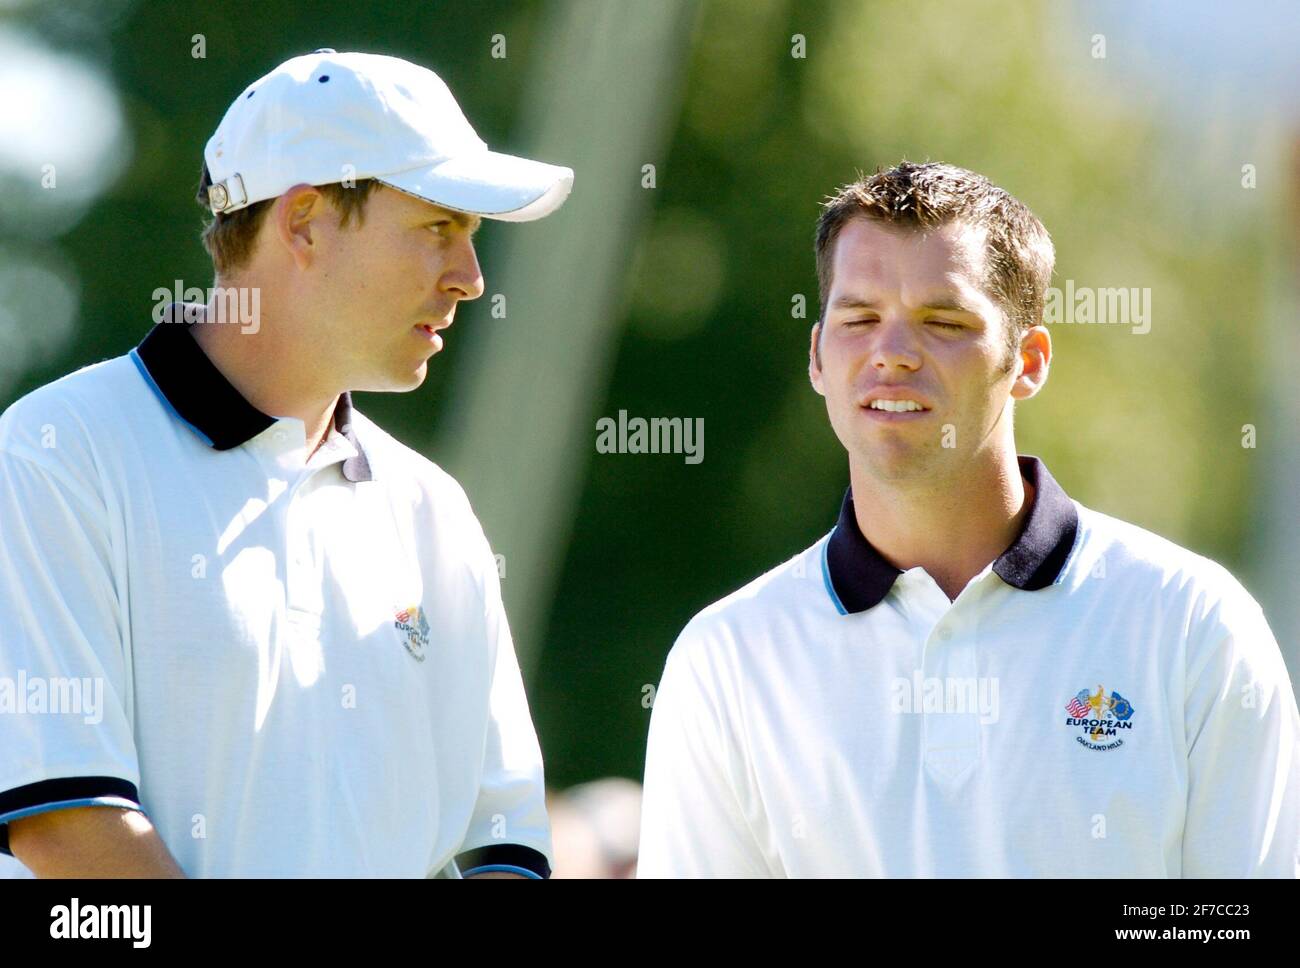 IL 35ESIMO RYDER CUP 2° GIORNO FOURBALL A OAKLAND HILLS COUNTRY CLUB BLOOMFIELD TOWNSHIP, MICHIGAN. PAUL CASEY E DAVID HOWELL 18/9/2004 FOTO DAVID ASHDOWNRYDER CUP GOLF Foto Stock